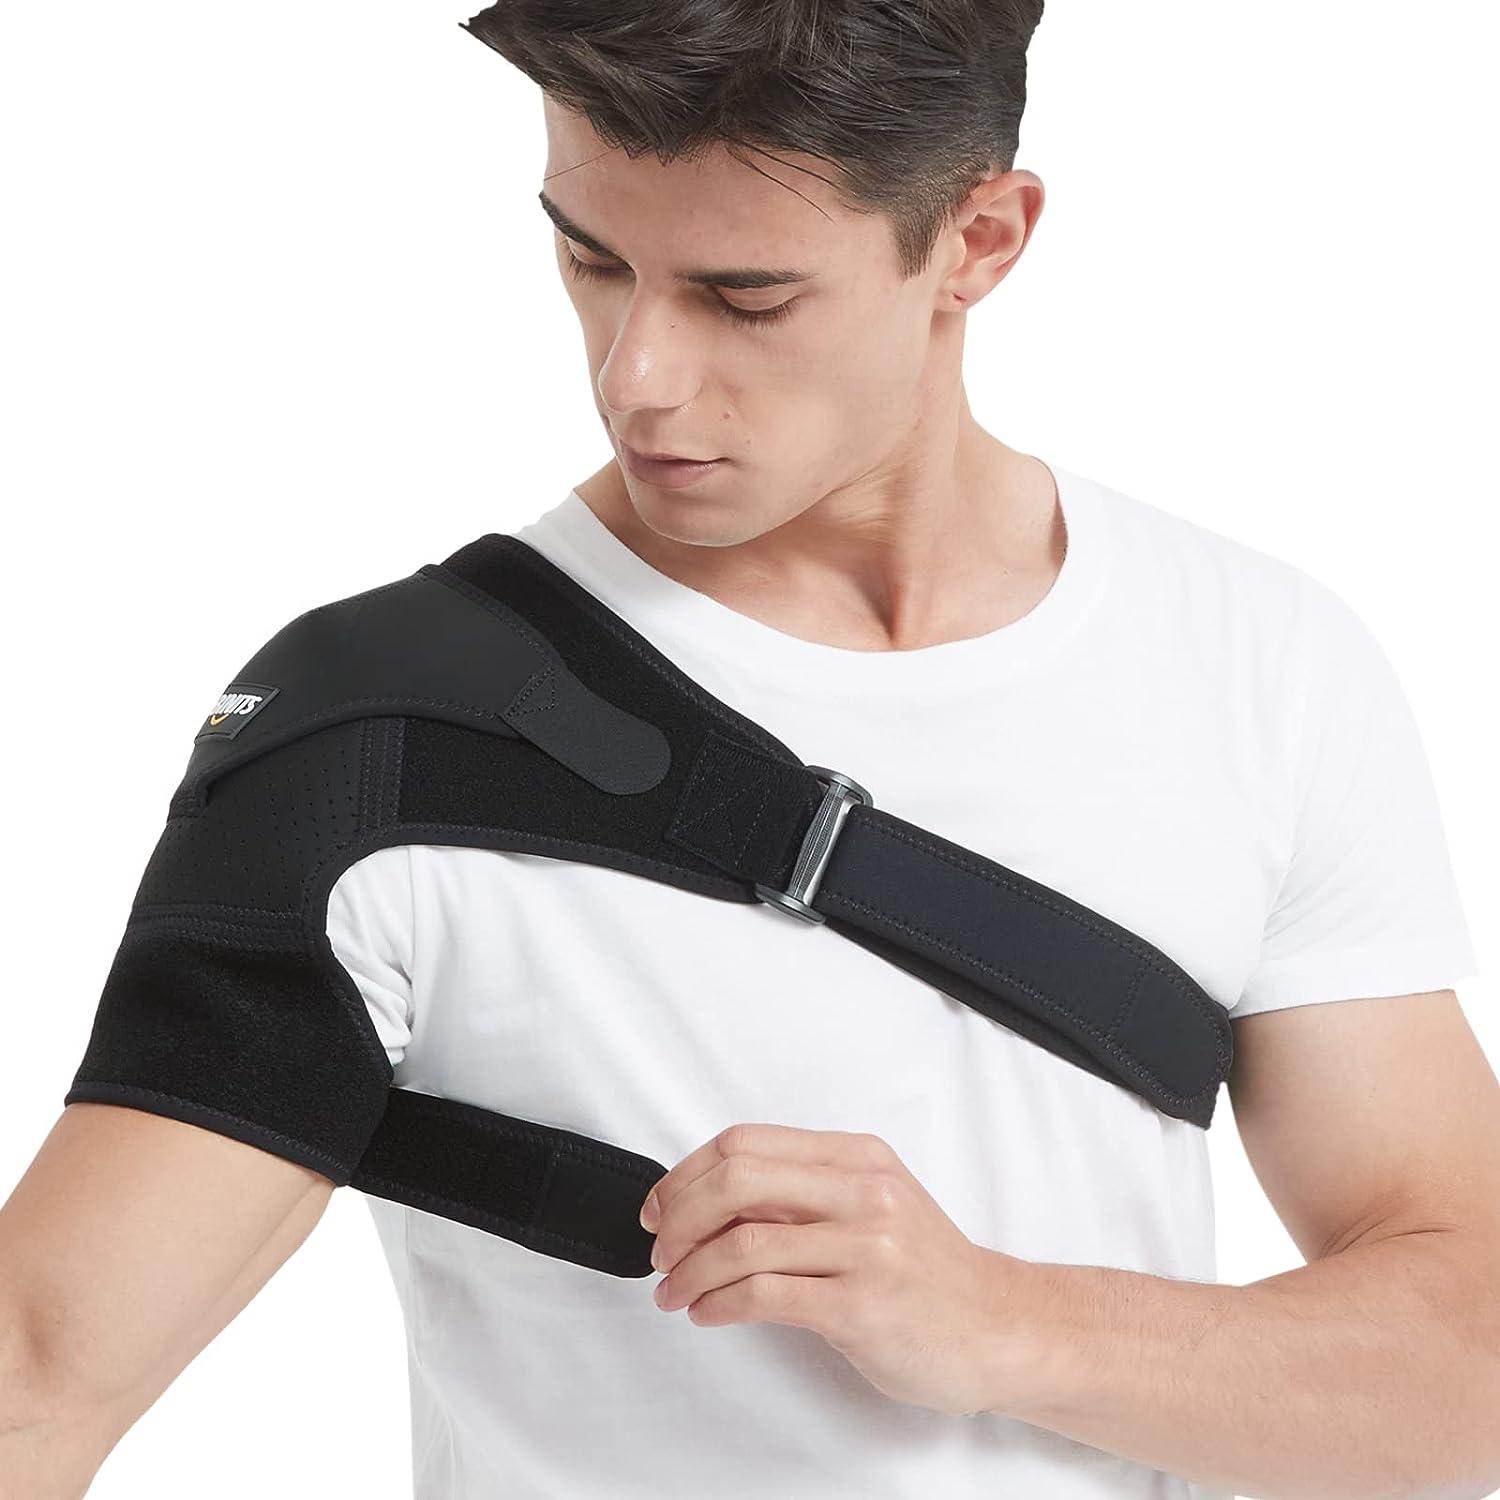 Shoulder Support for Women and Men Shoulder Brace Adjustable Shoulder Brace  Rotator Cuff Shoulder Support Shoulder Strap Support for Rotator Cuff Pain  Relief Dislocated Joints Fits Both Right or Left